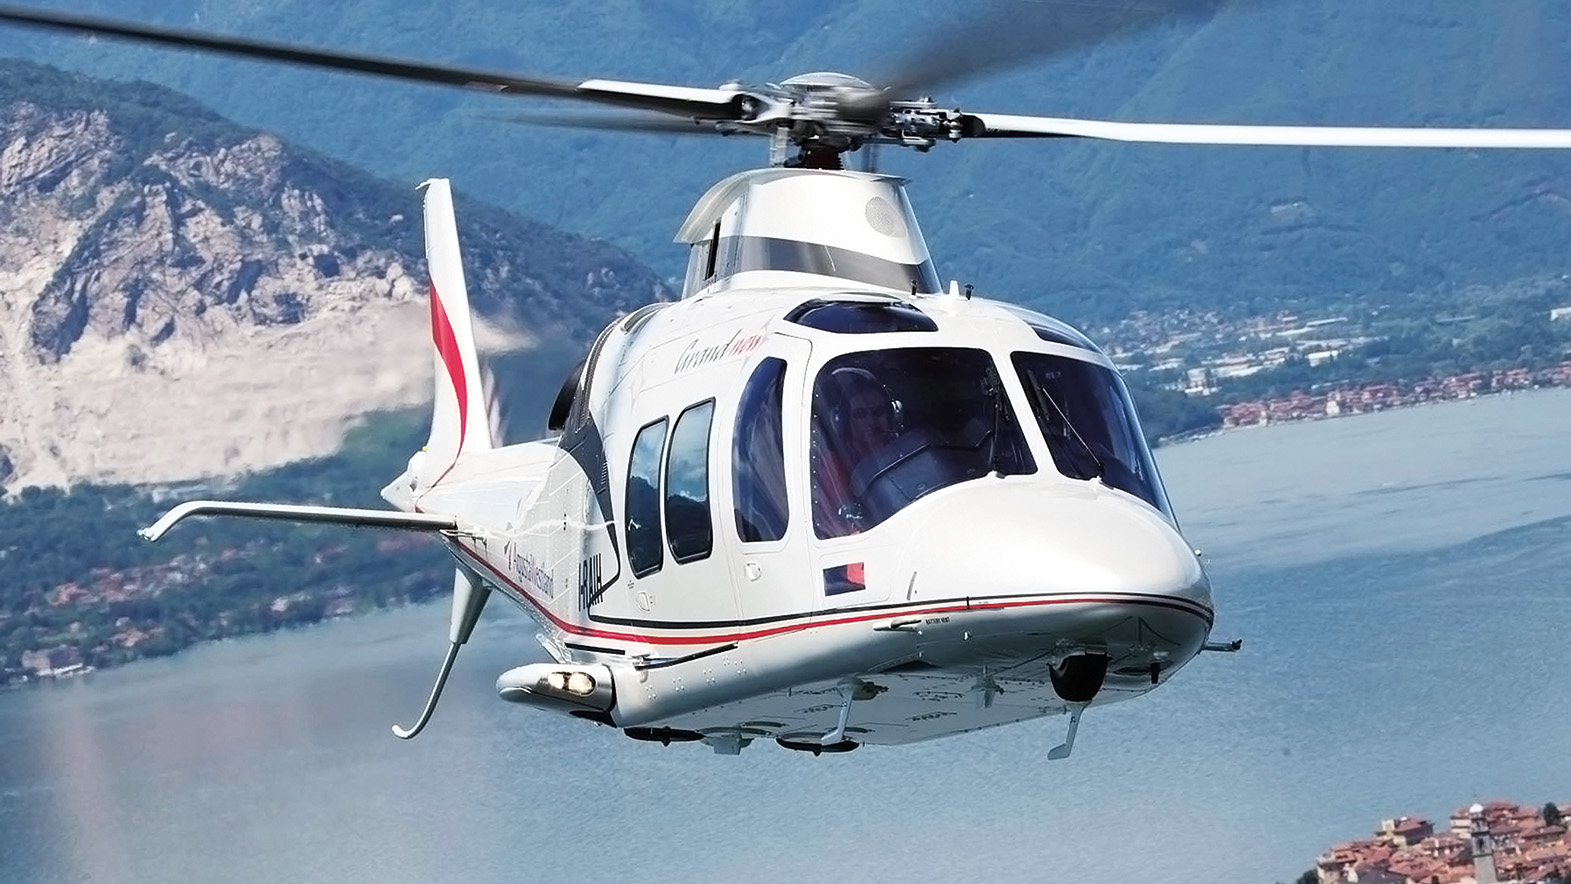 Agusta A109 St-Moritz helicopter flights